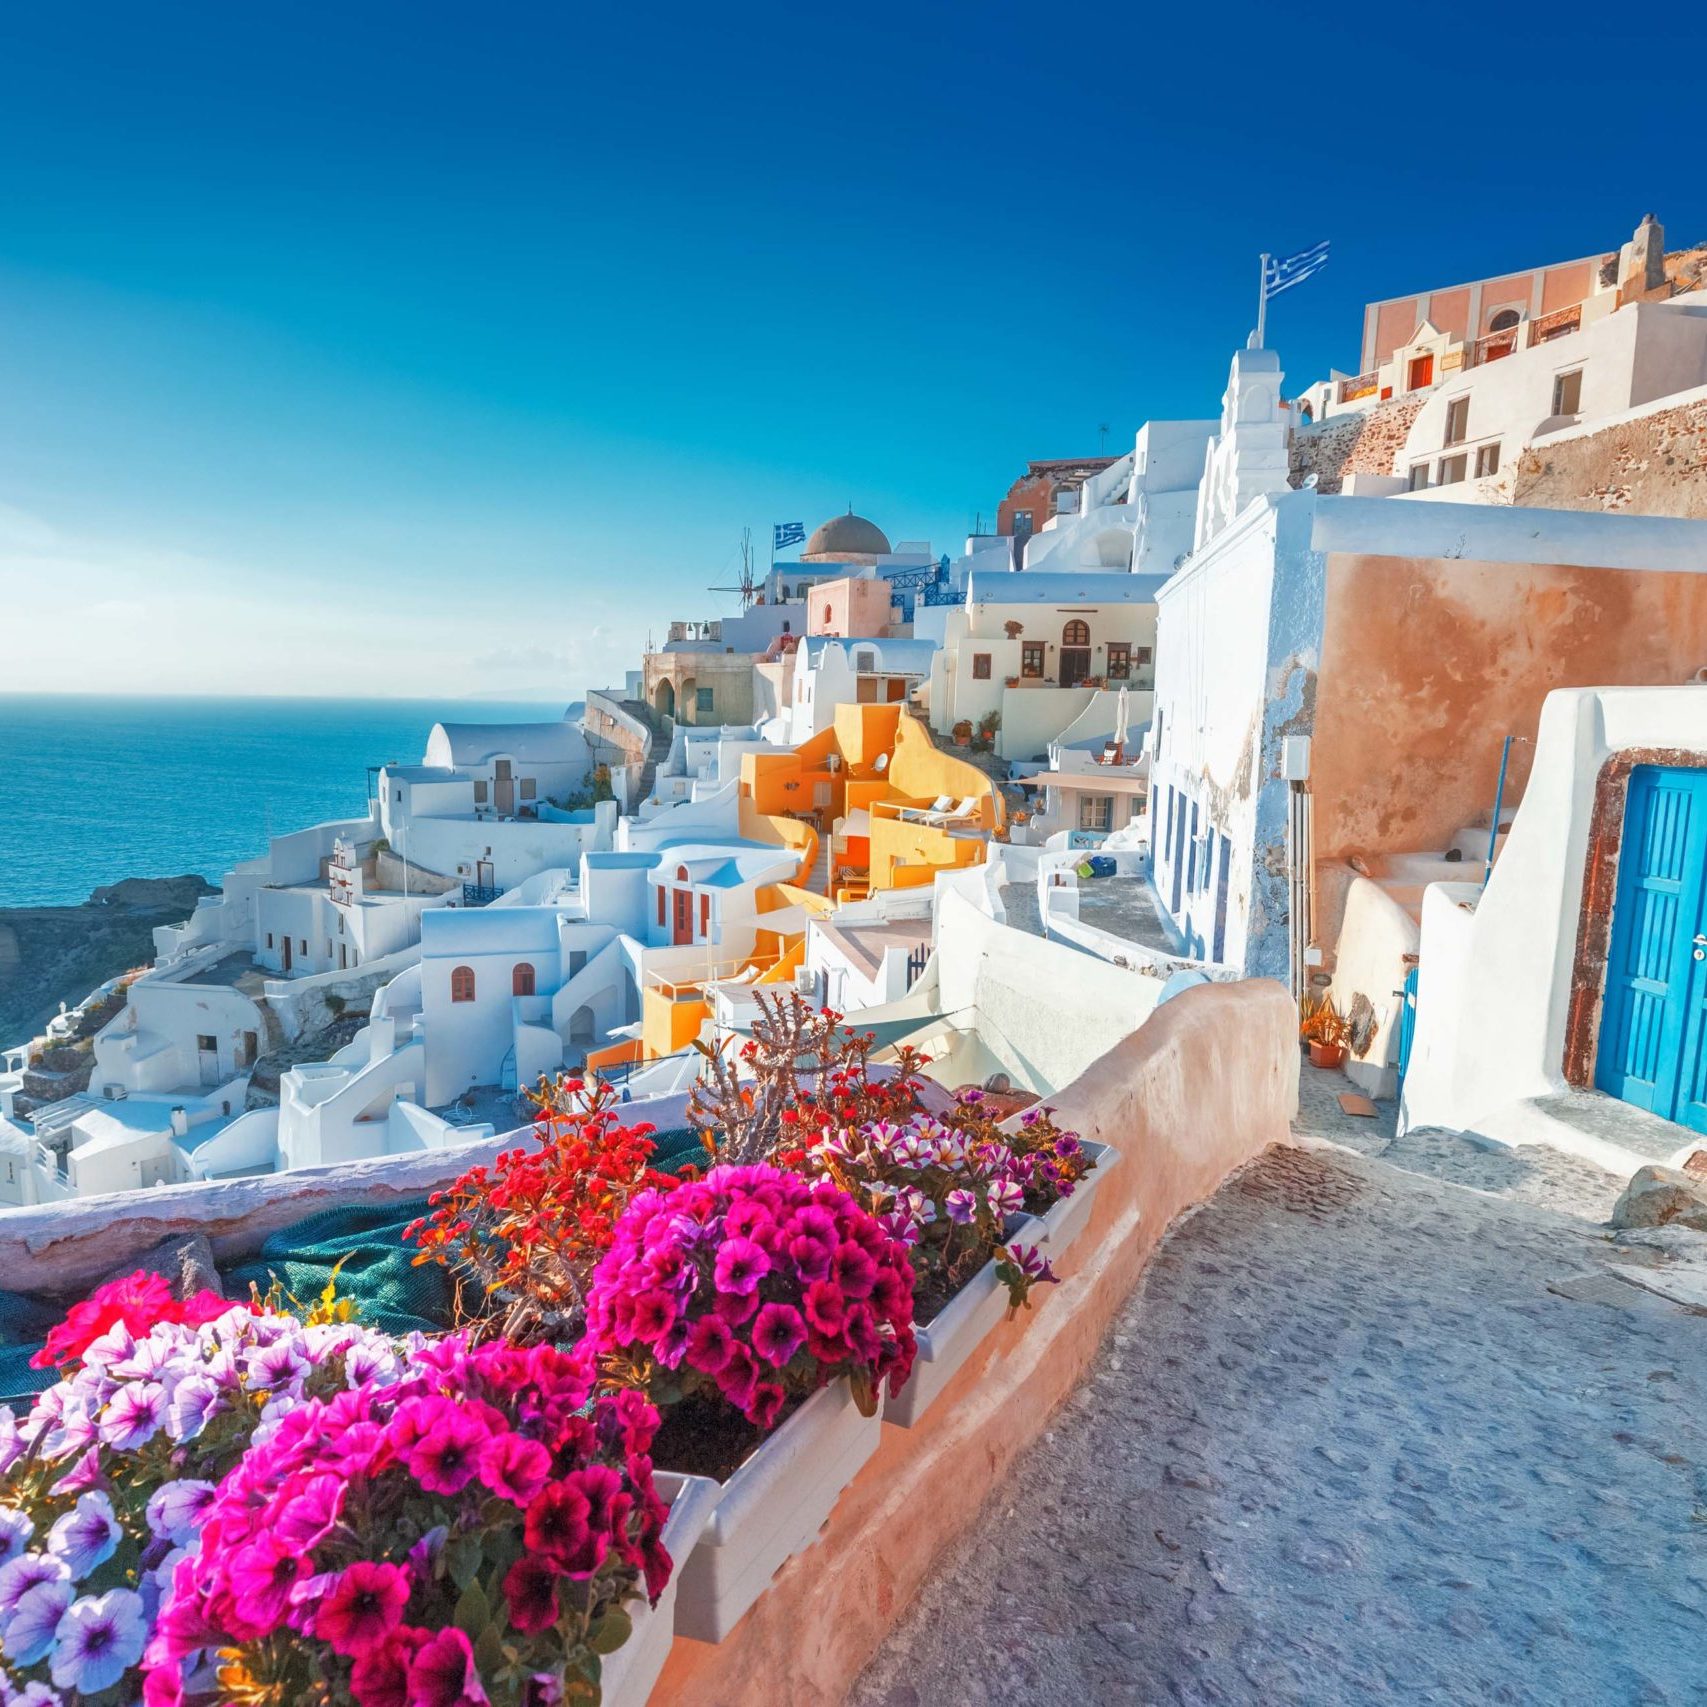 Santorini, Greece. Picturesq view of traditional cycladic Santorini houses on small street with flowers in foreground. Location: Oia village, Santorini, Greece. Vacations background.